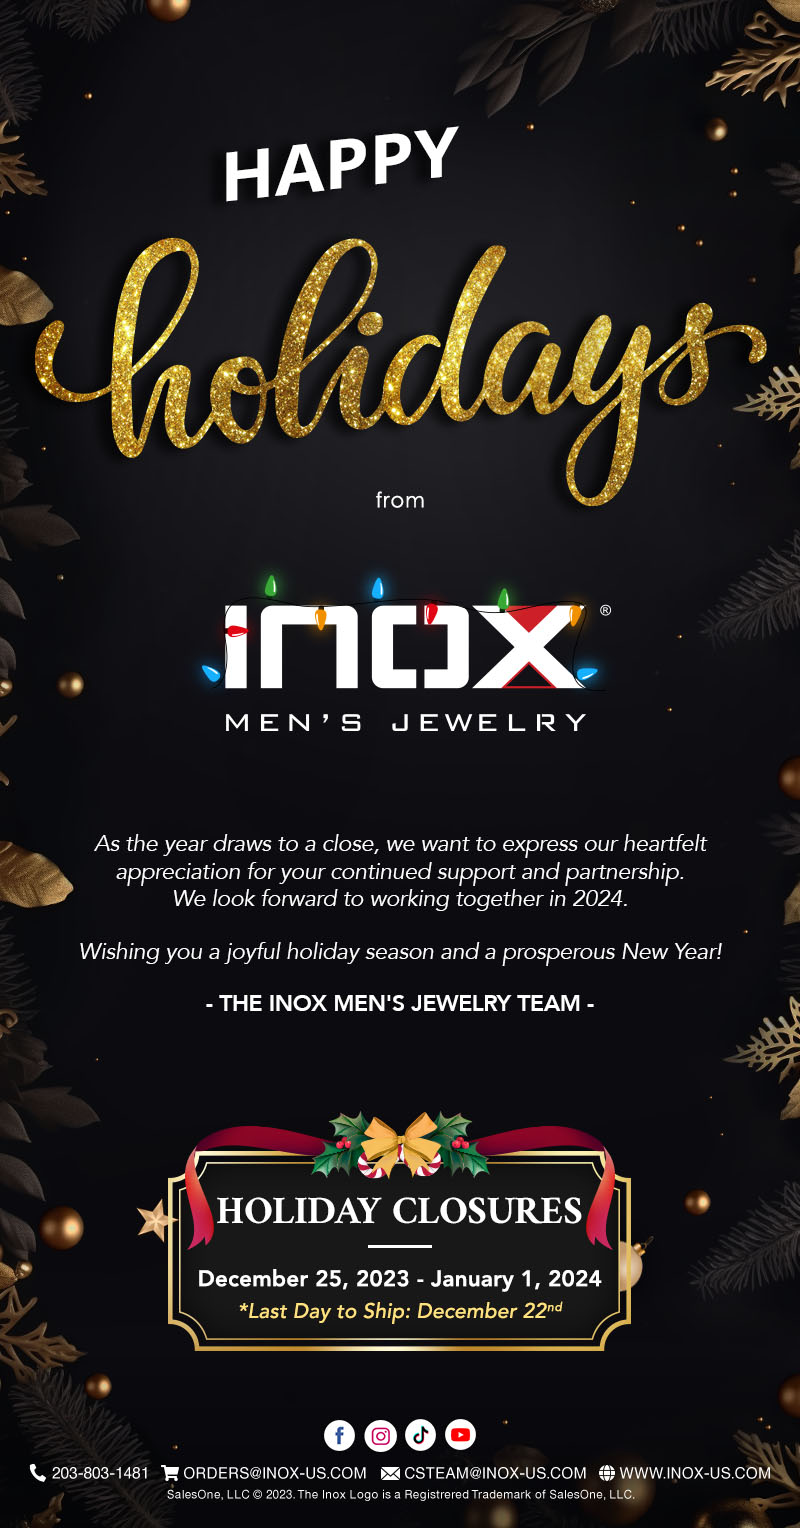 Happy Holidays and Warm Wishes from INOX